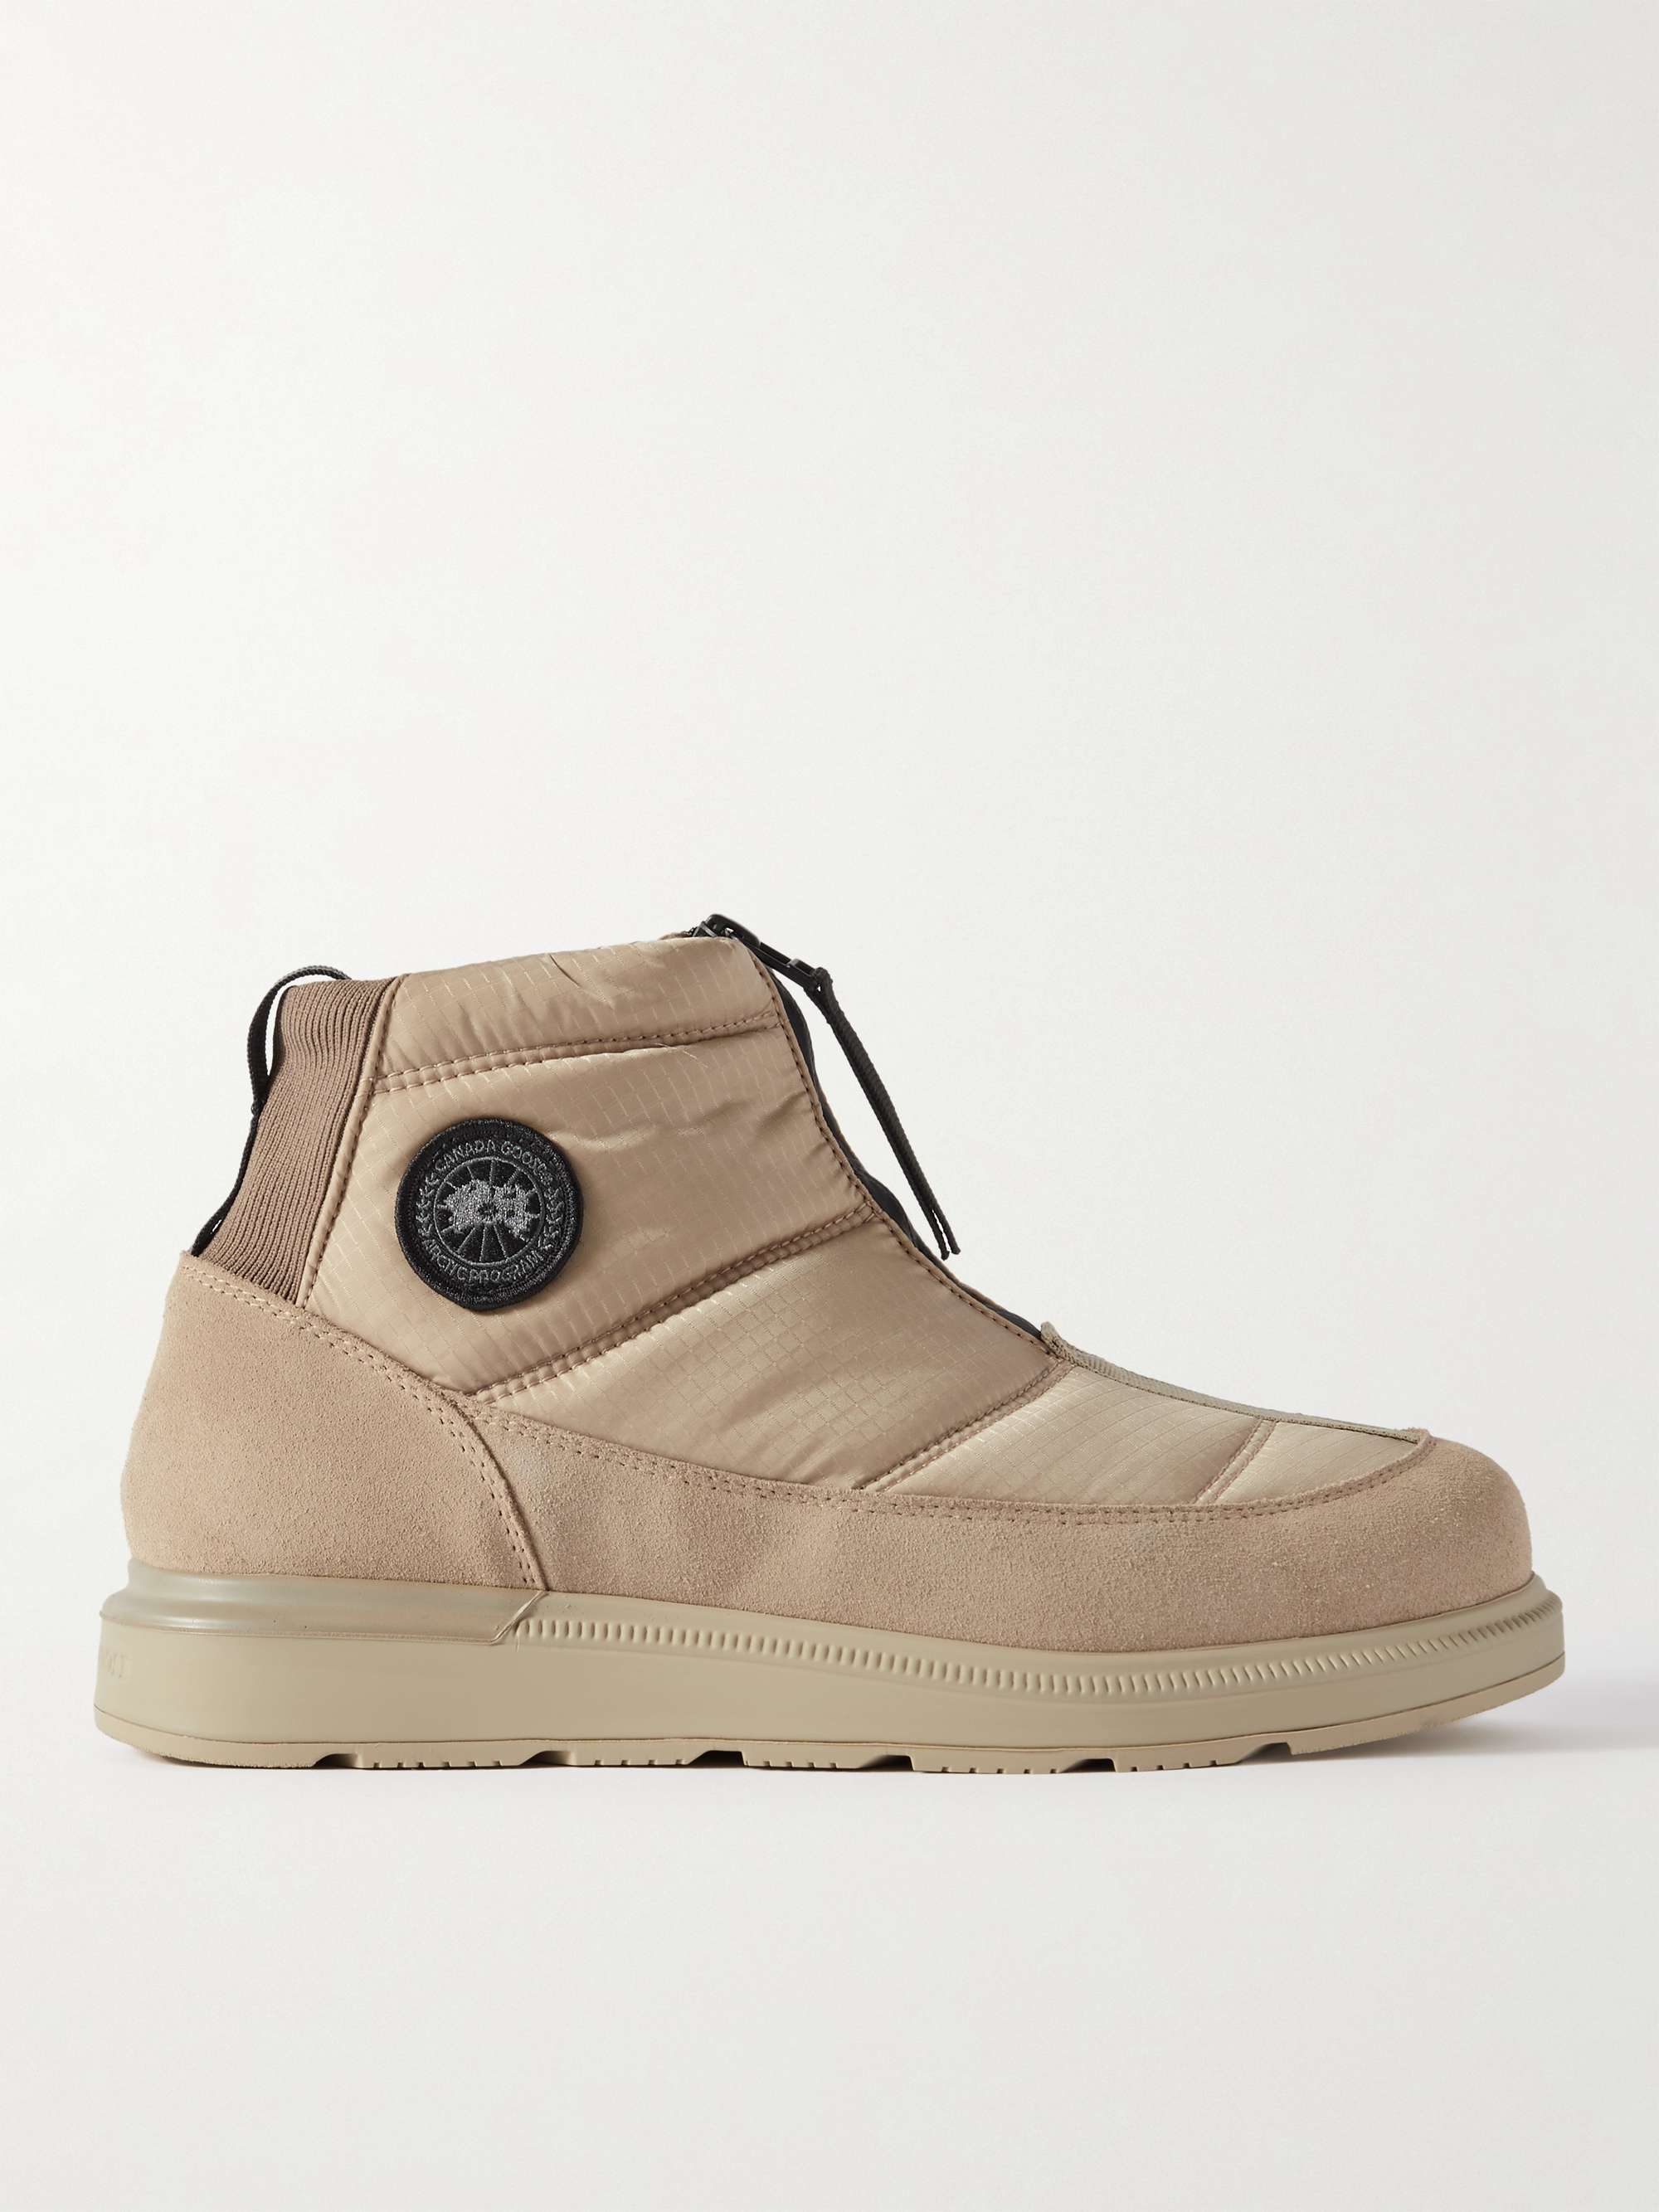 CANADA GOOSE Crofton Suede-Trimmed Quilted Ripstop Boots for Men | MR PORTER